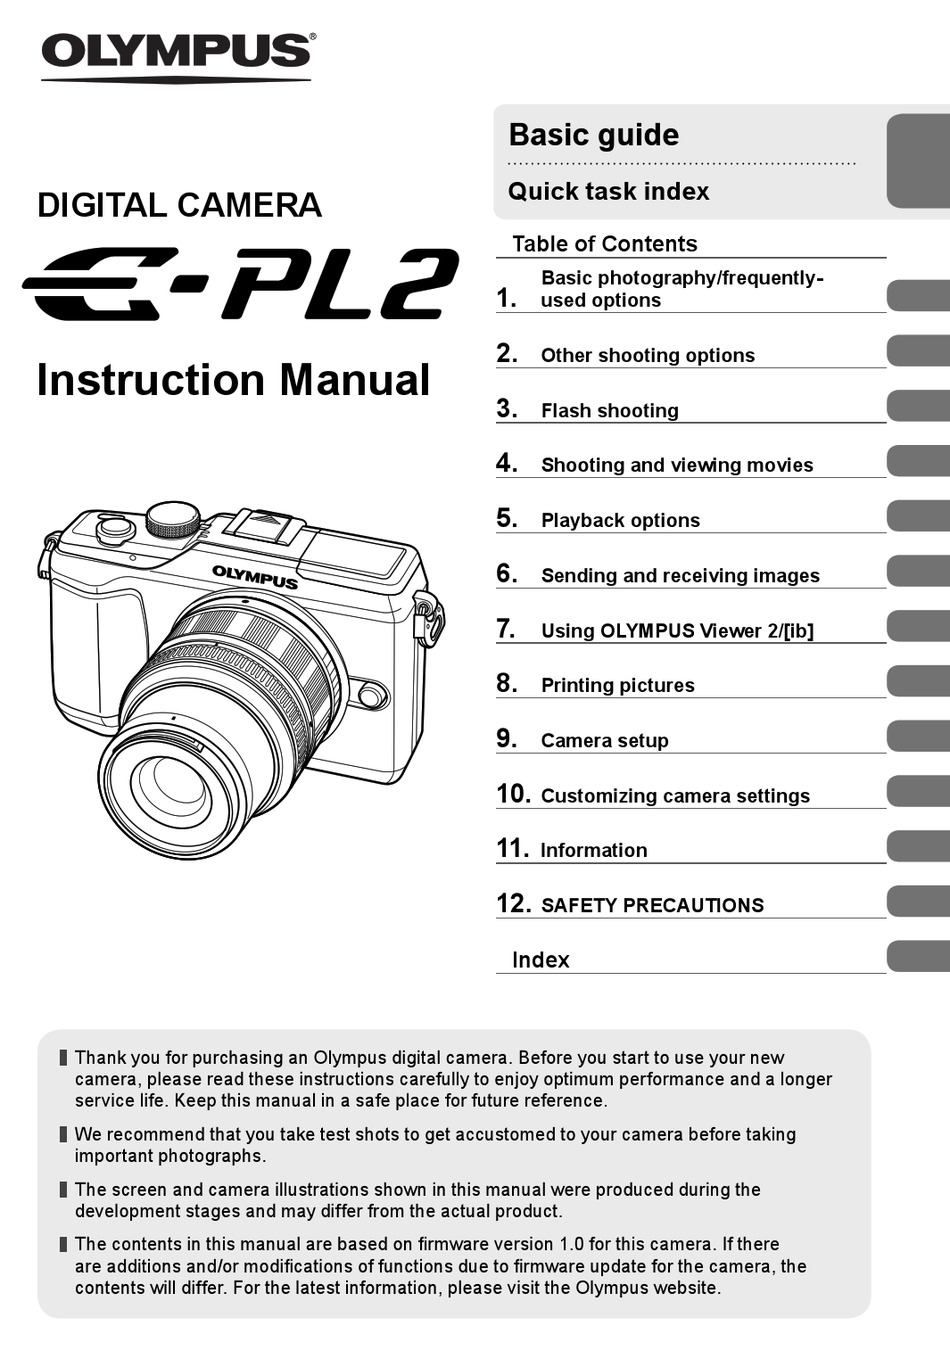 OLYMPUS E-PL5 DIGITAL CAMERA PRINTED INSTRUCTION MANUAL USER GUIDE 133 PAGES 